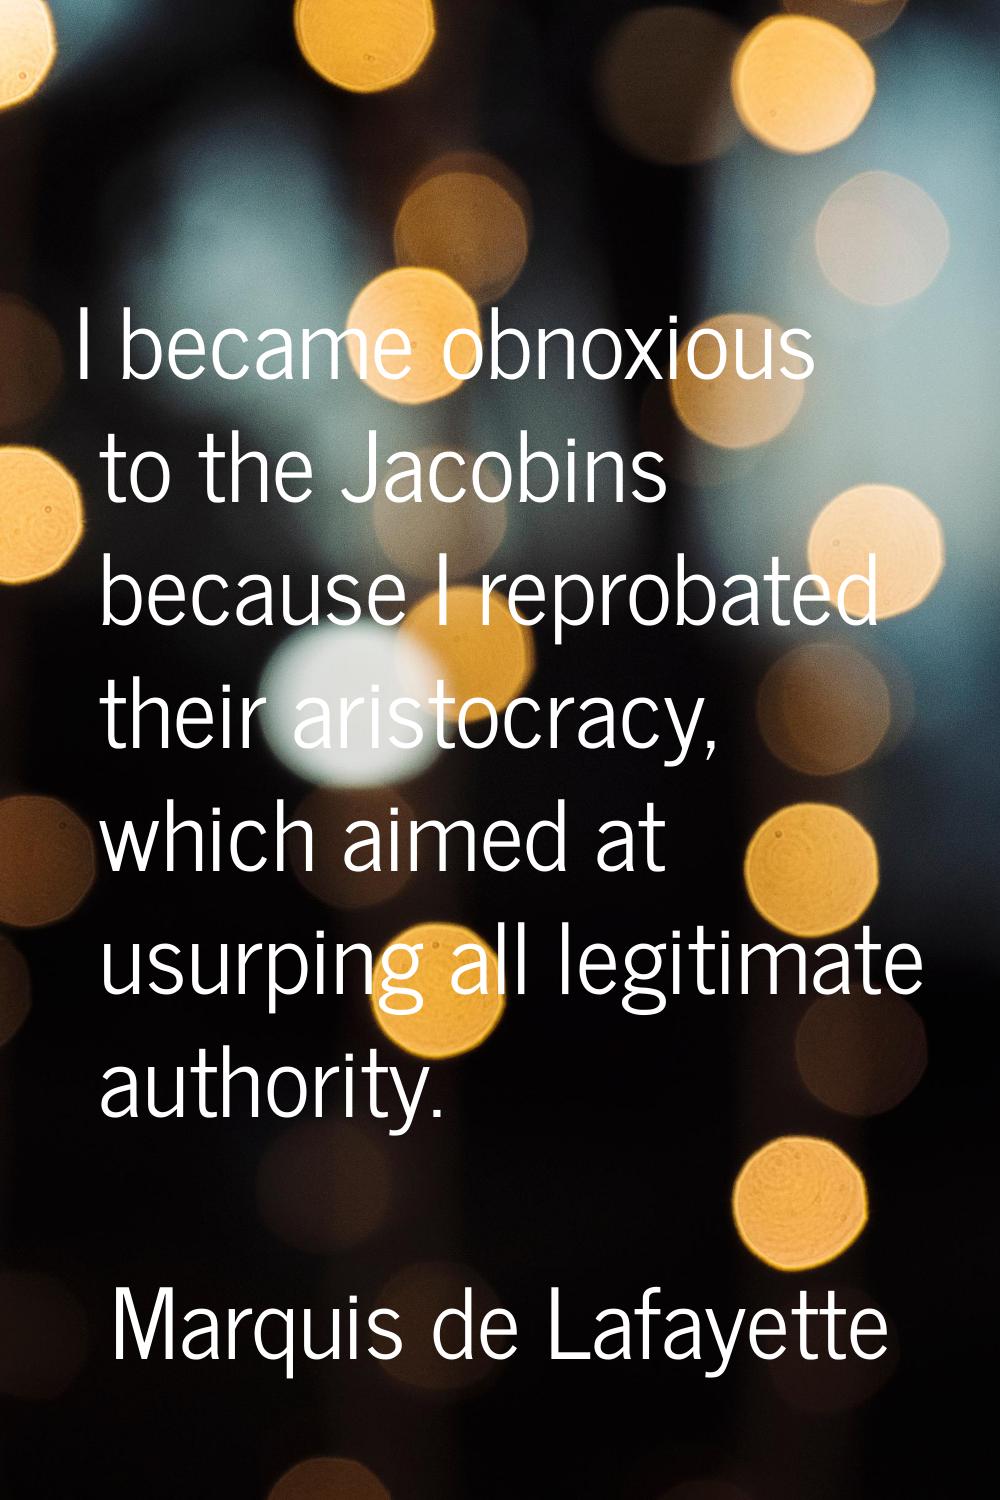 I became obnoxious to the Jacobins because I reprobated their aristocracy, which aimed at usurping 